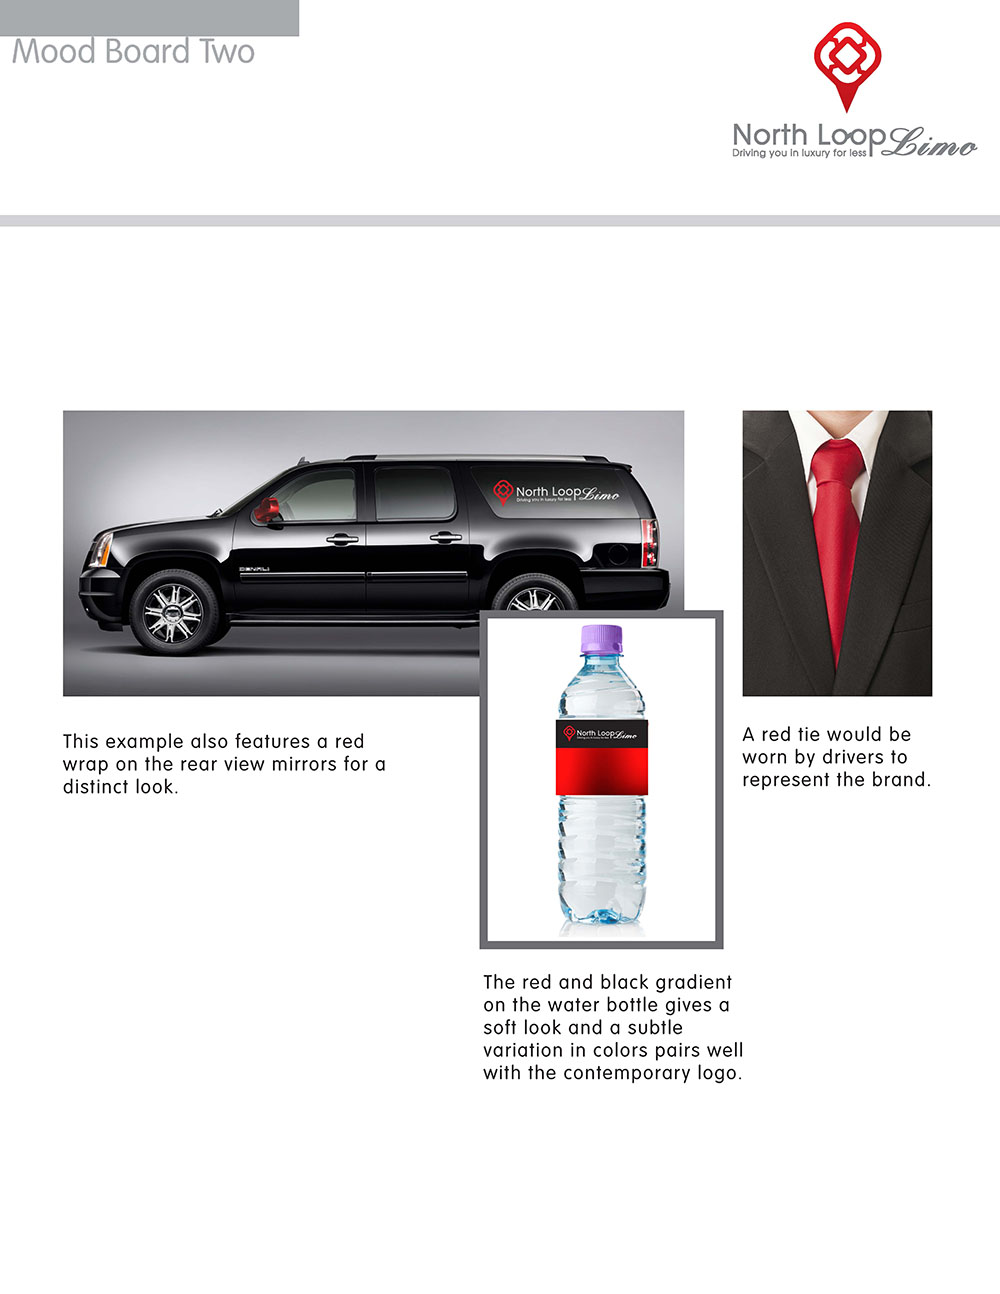 North Loop Limo Branding and Mood Boards